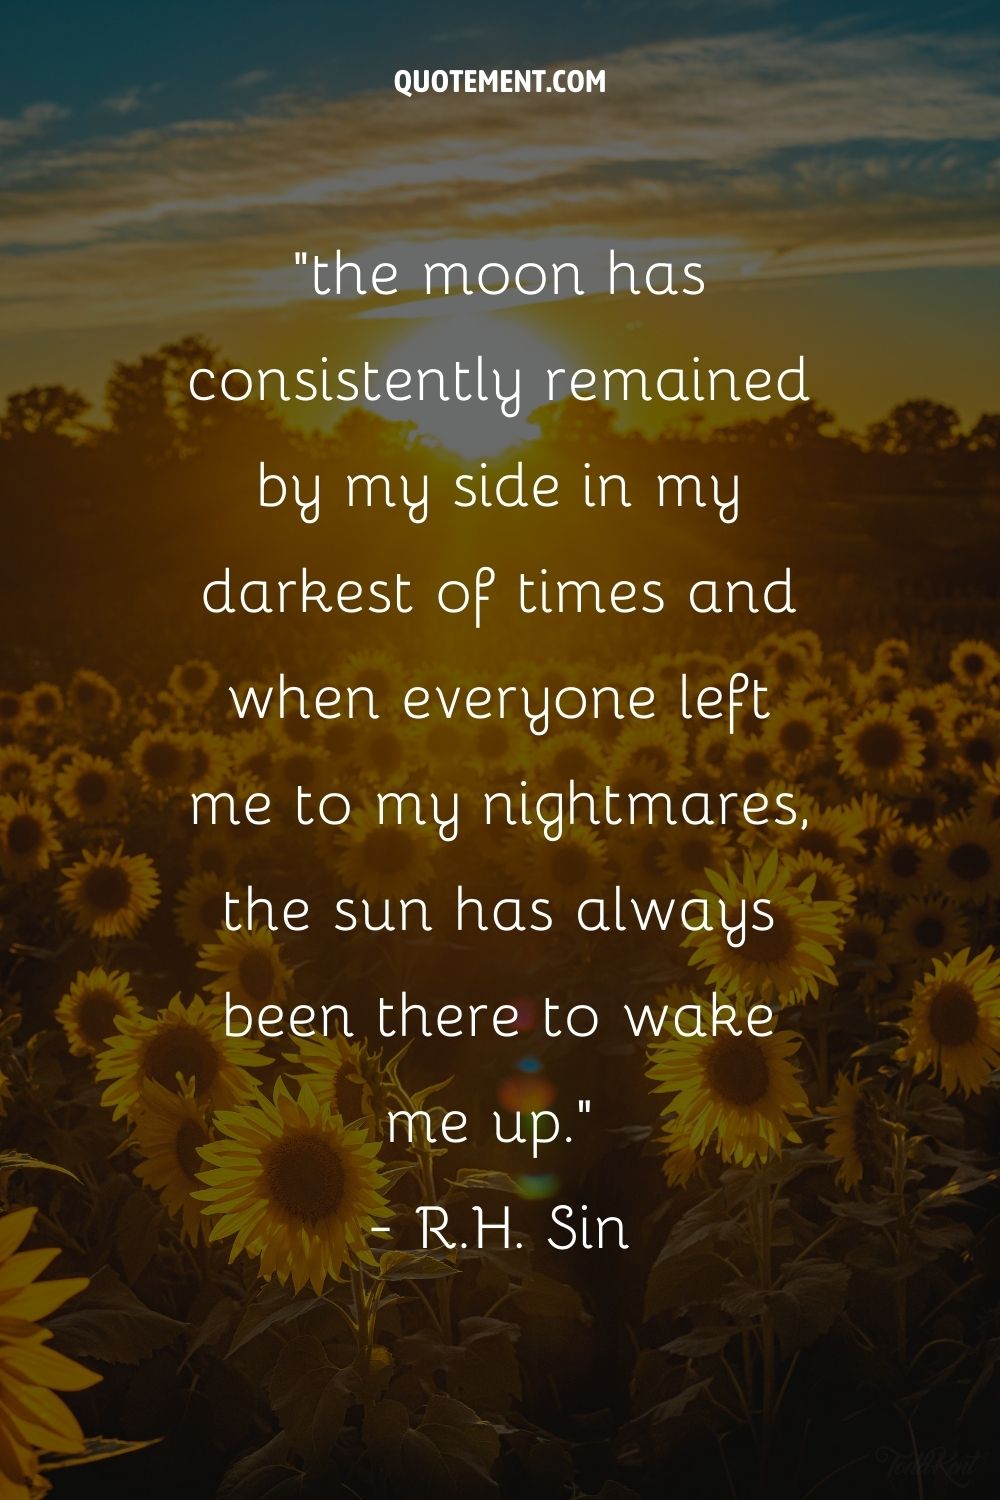 the moon has consistently remained by my side in my darkest of times and when everyone left me to my nightmares, the sun has always been there to wake me up